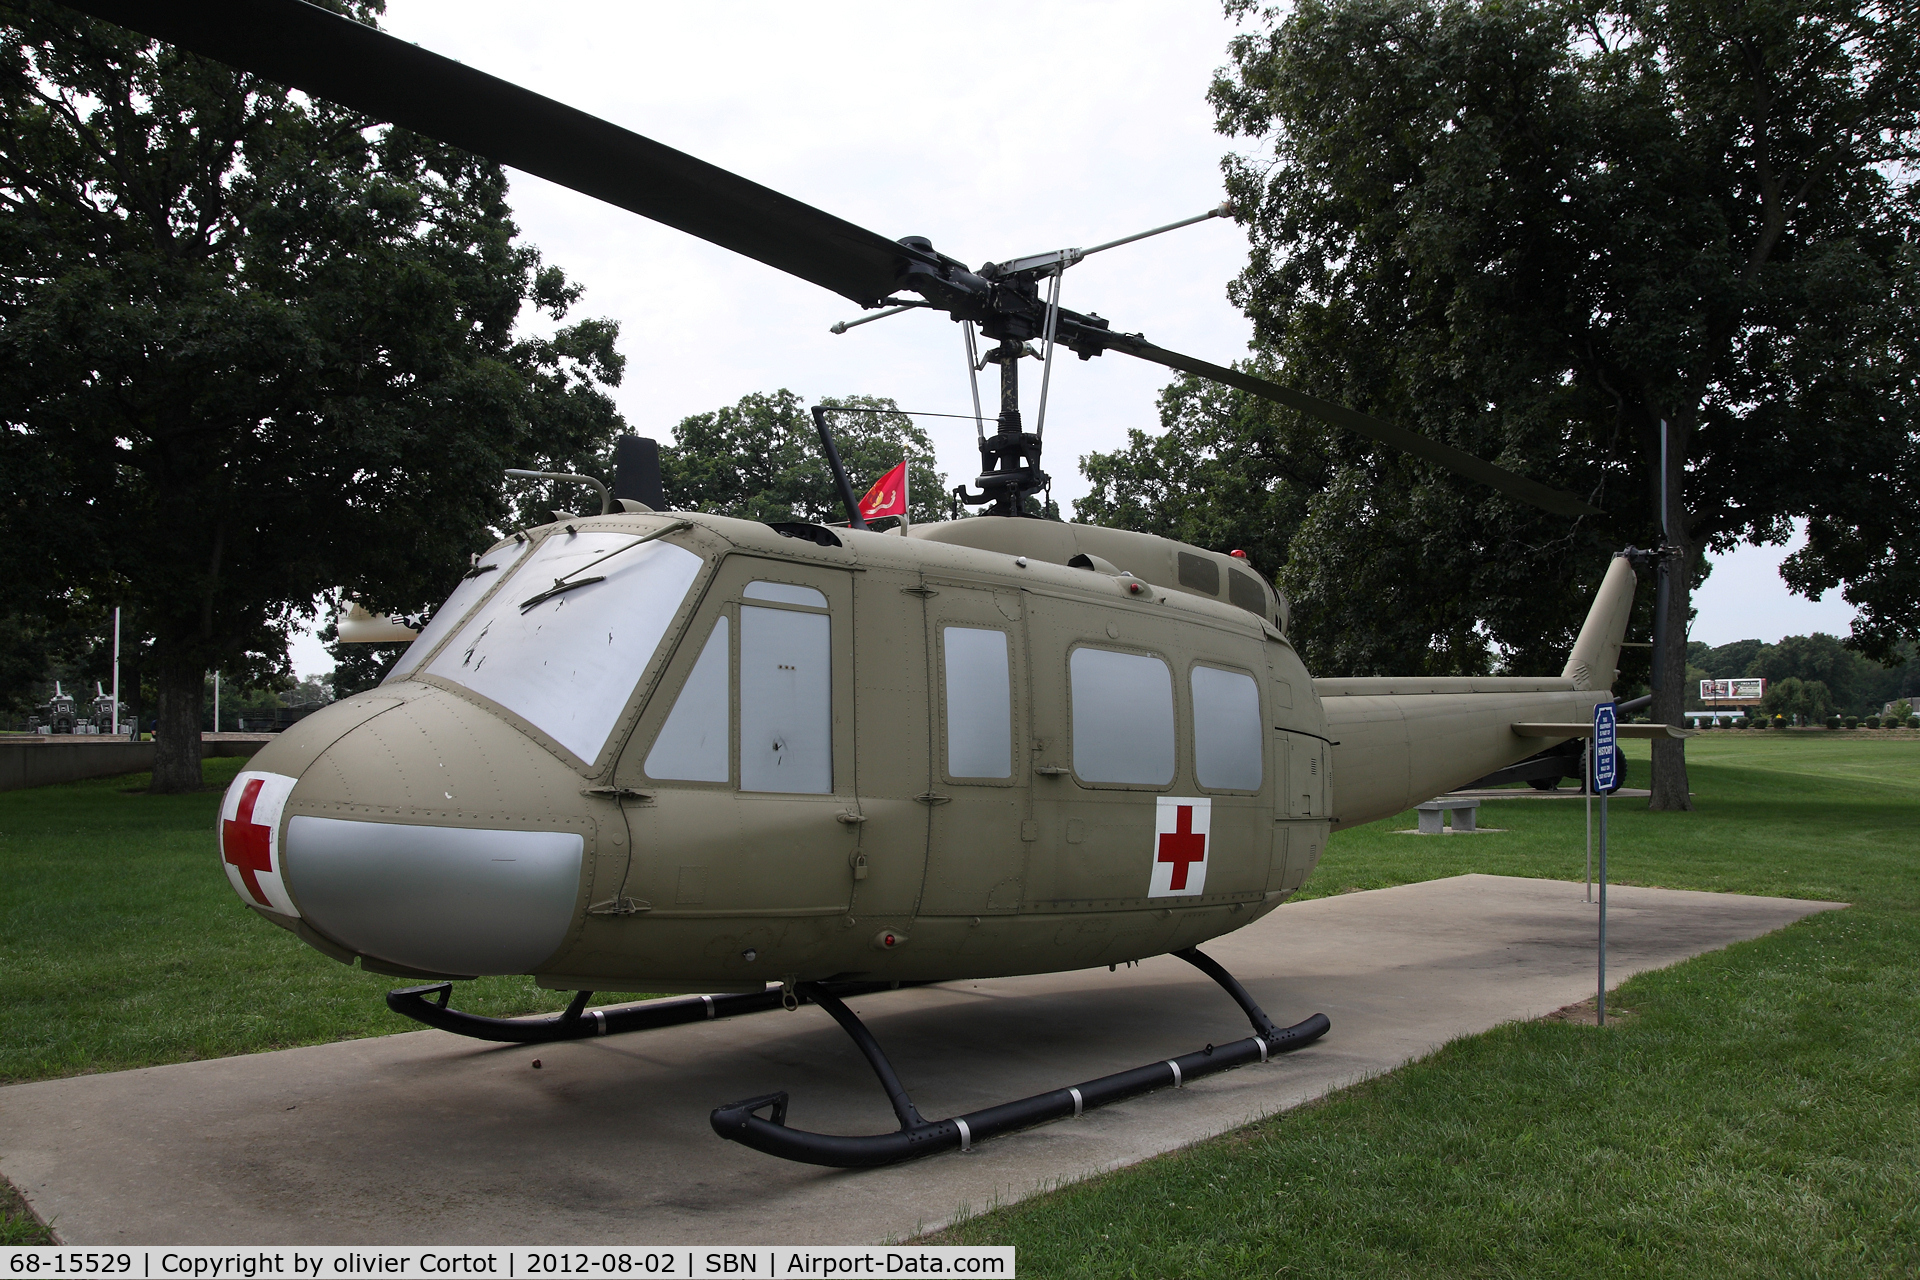 68-15529, 1968 Bell UH-1V Iroquois C/N 10459, displayed with some tanks, missiles and a T-33 at the military honor park, South Bend airport.